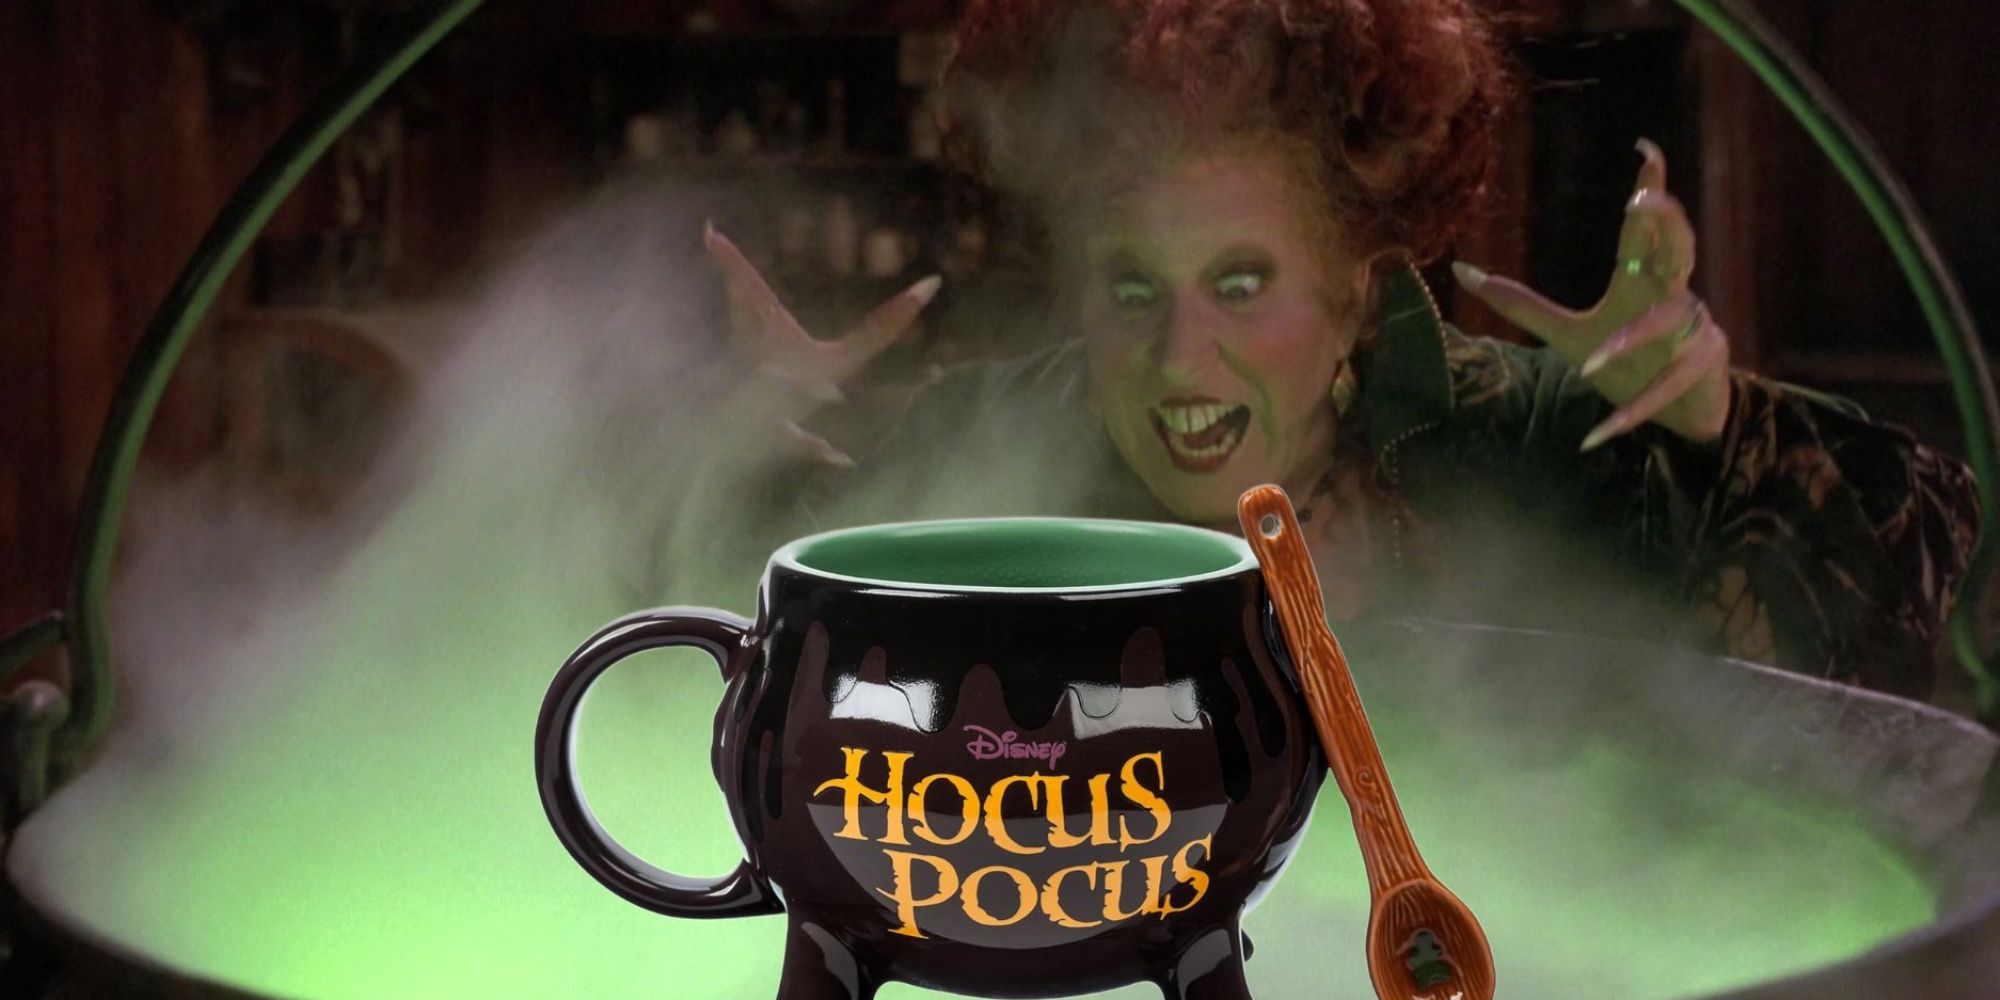 Best Disney Mugs Featured Image Witch From Hocus Pocus Excitedly Looking At Hocus Pocus Mug